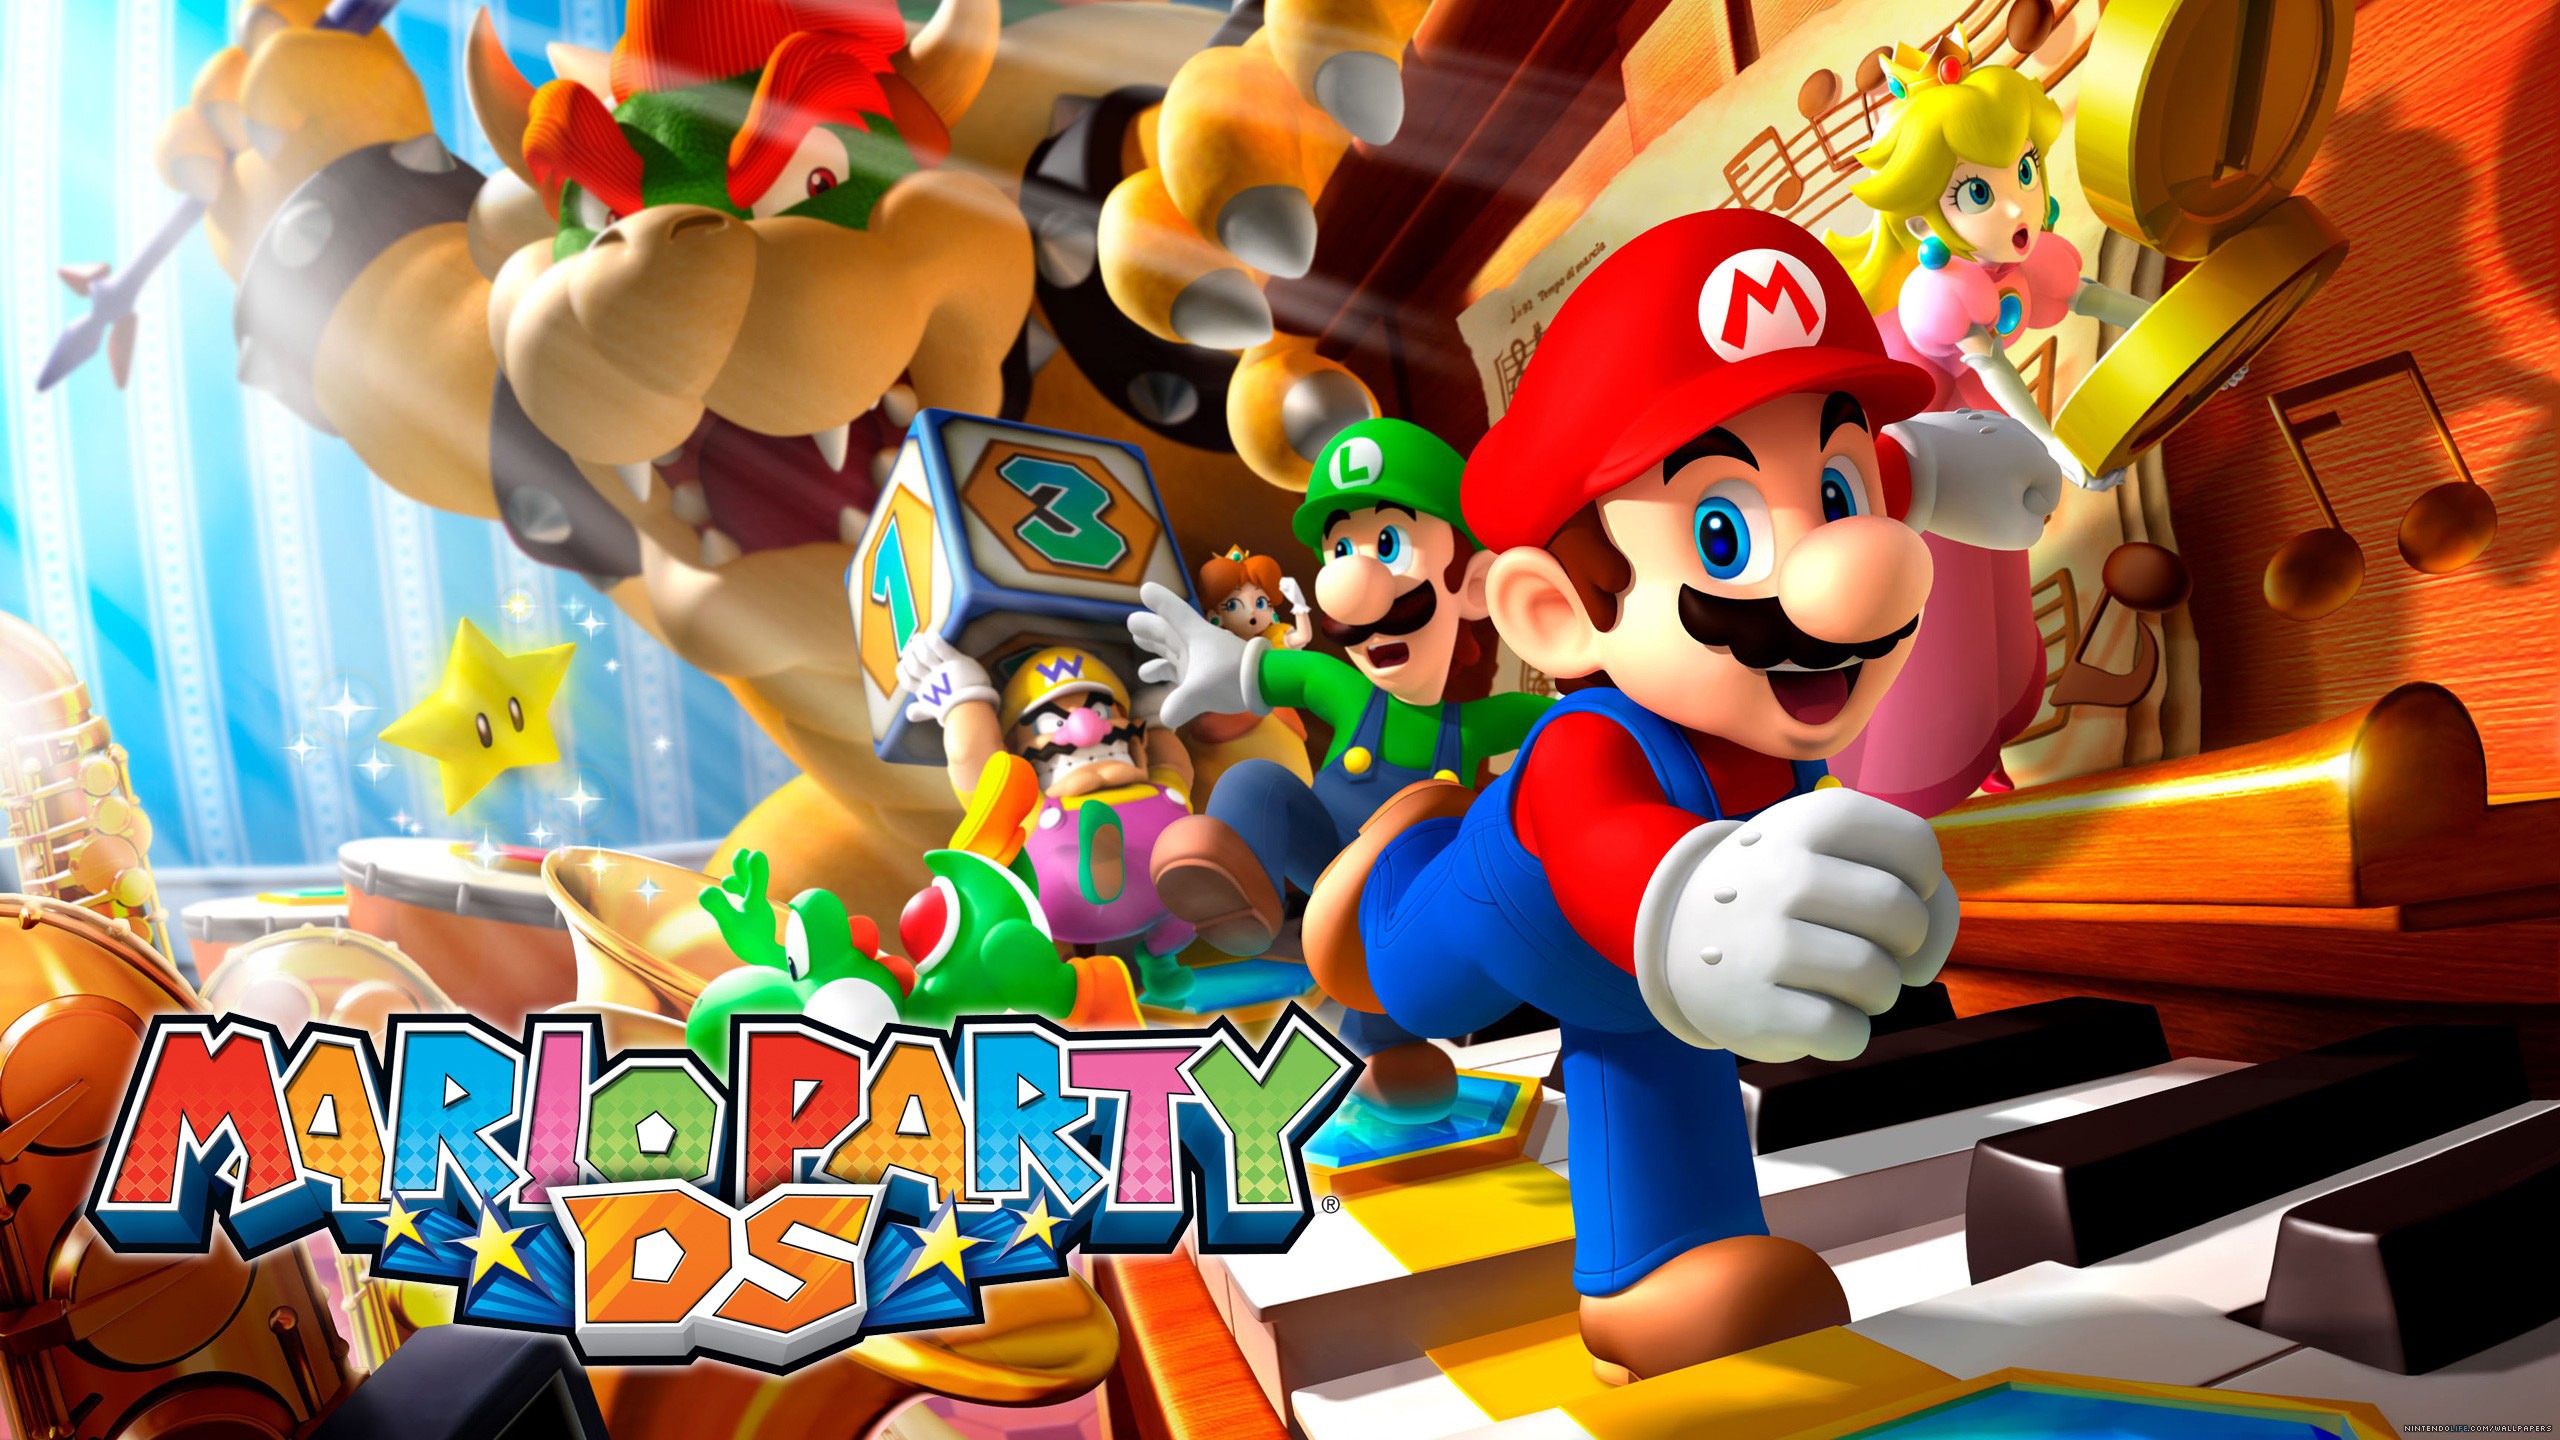 Mario Party DS for 2560x1440 HDTV resolution